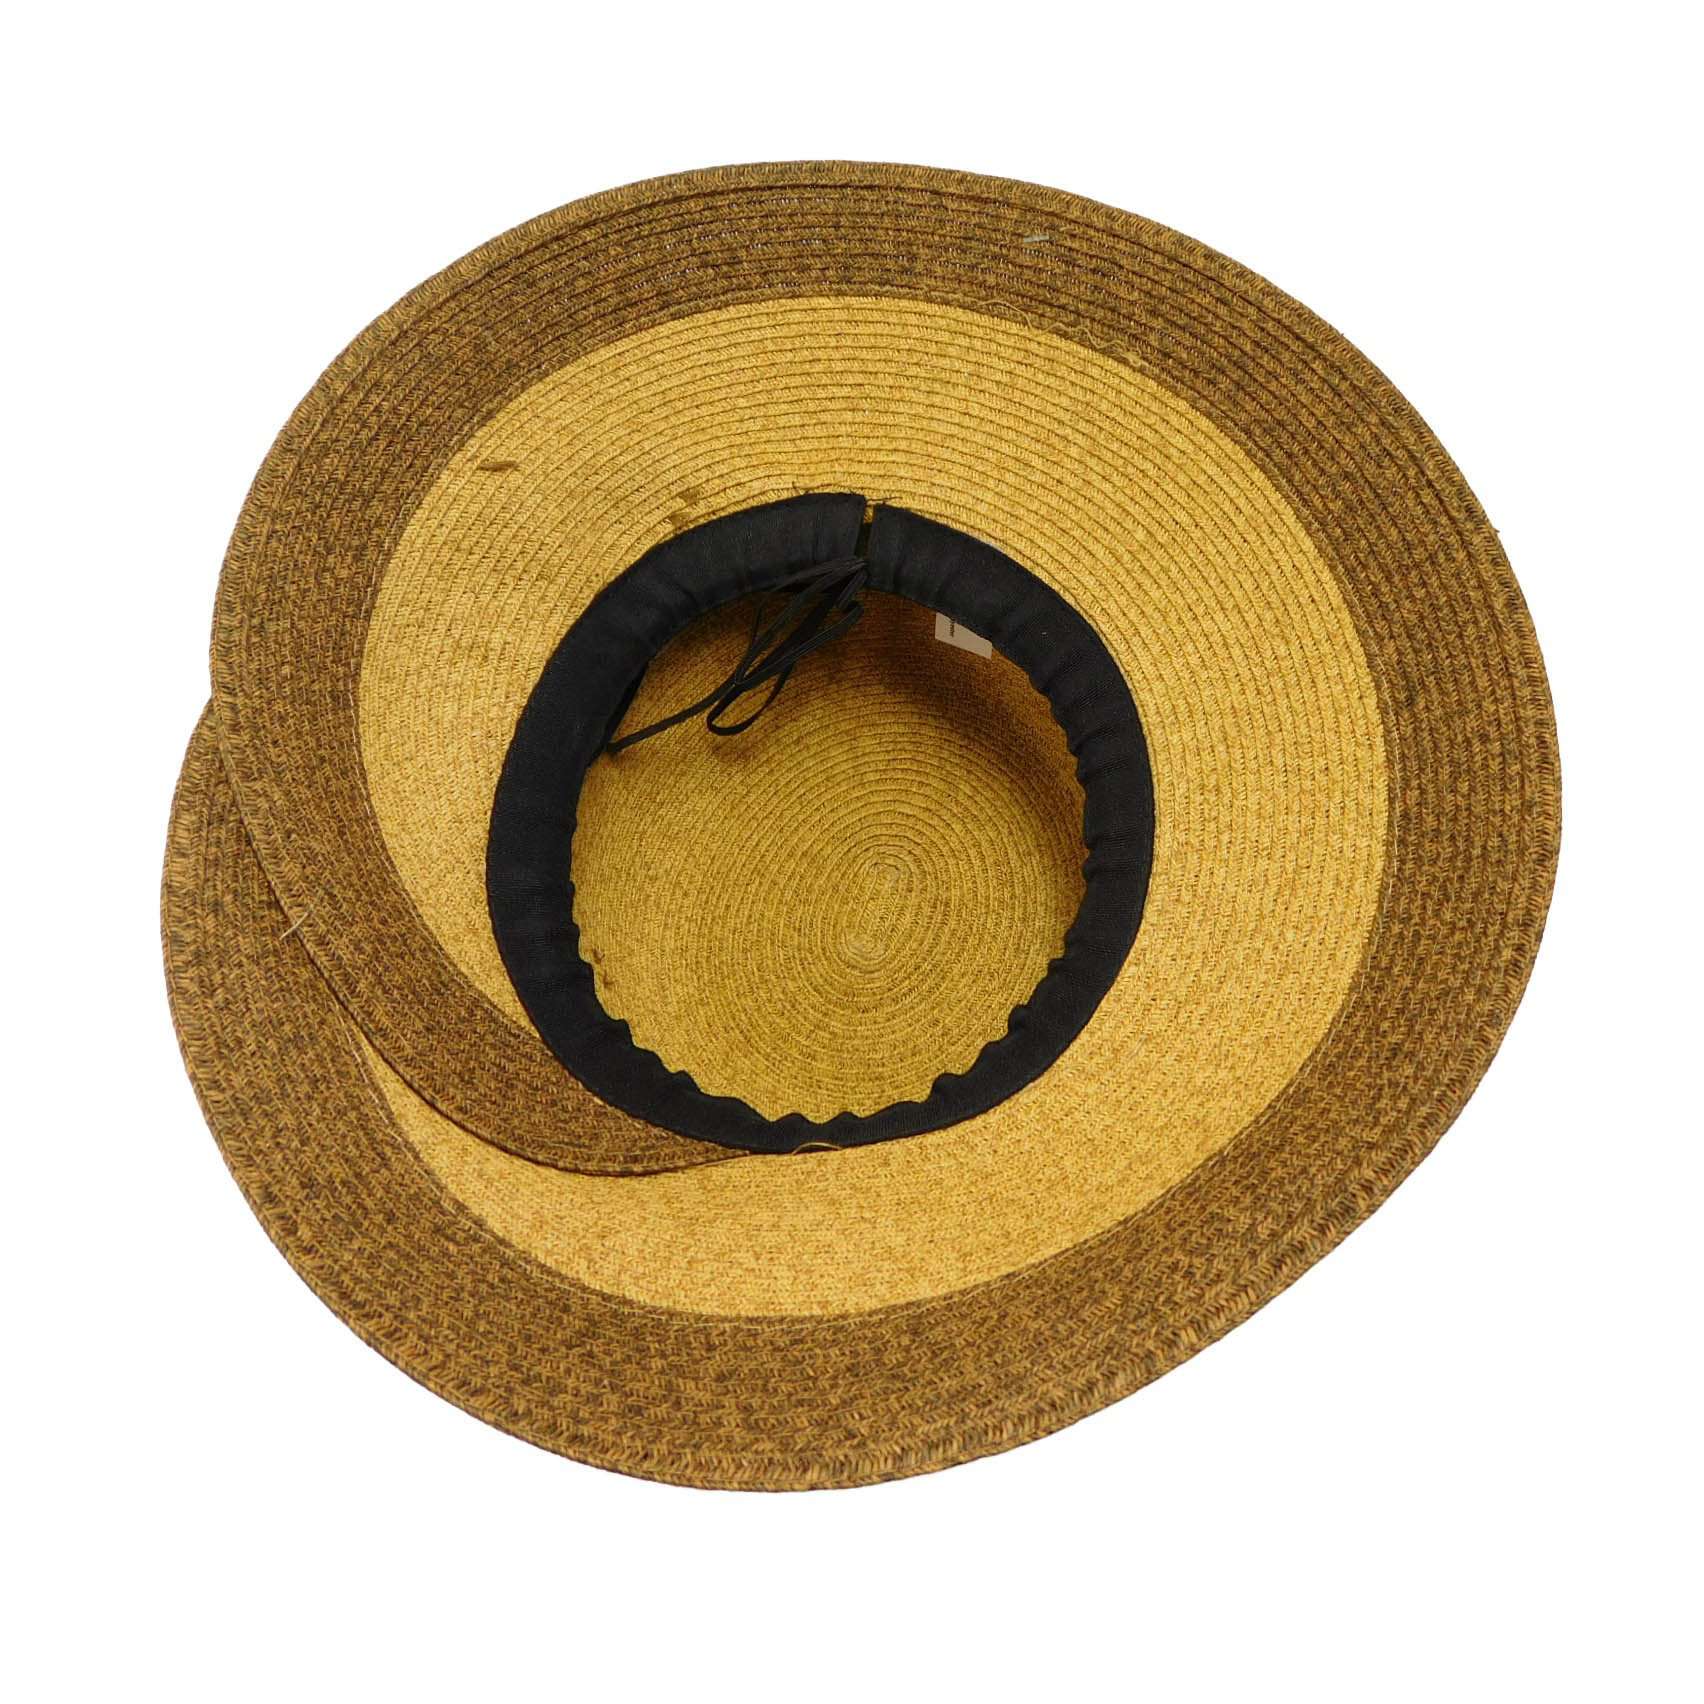 Overlapping Brim and Bow Sun Hat, Wide Brim Hat - SetarTrading Hats 